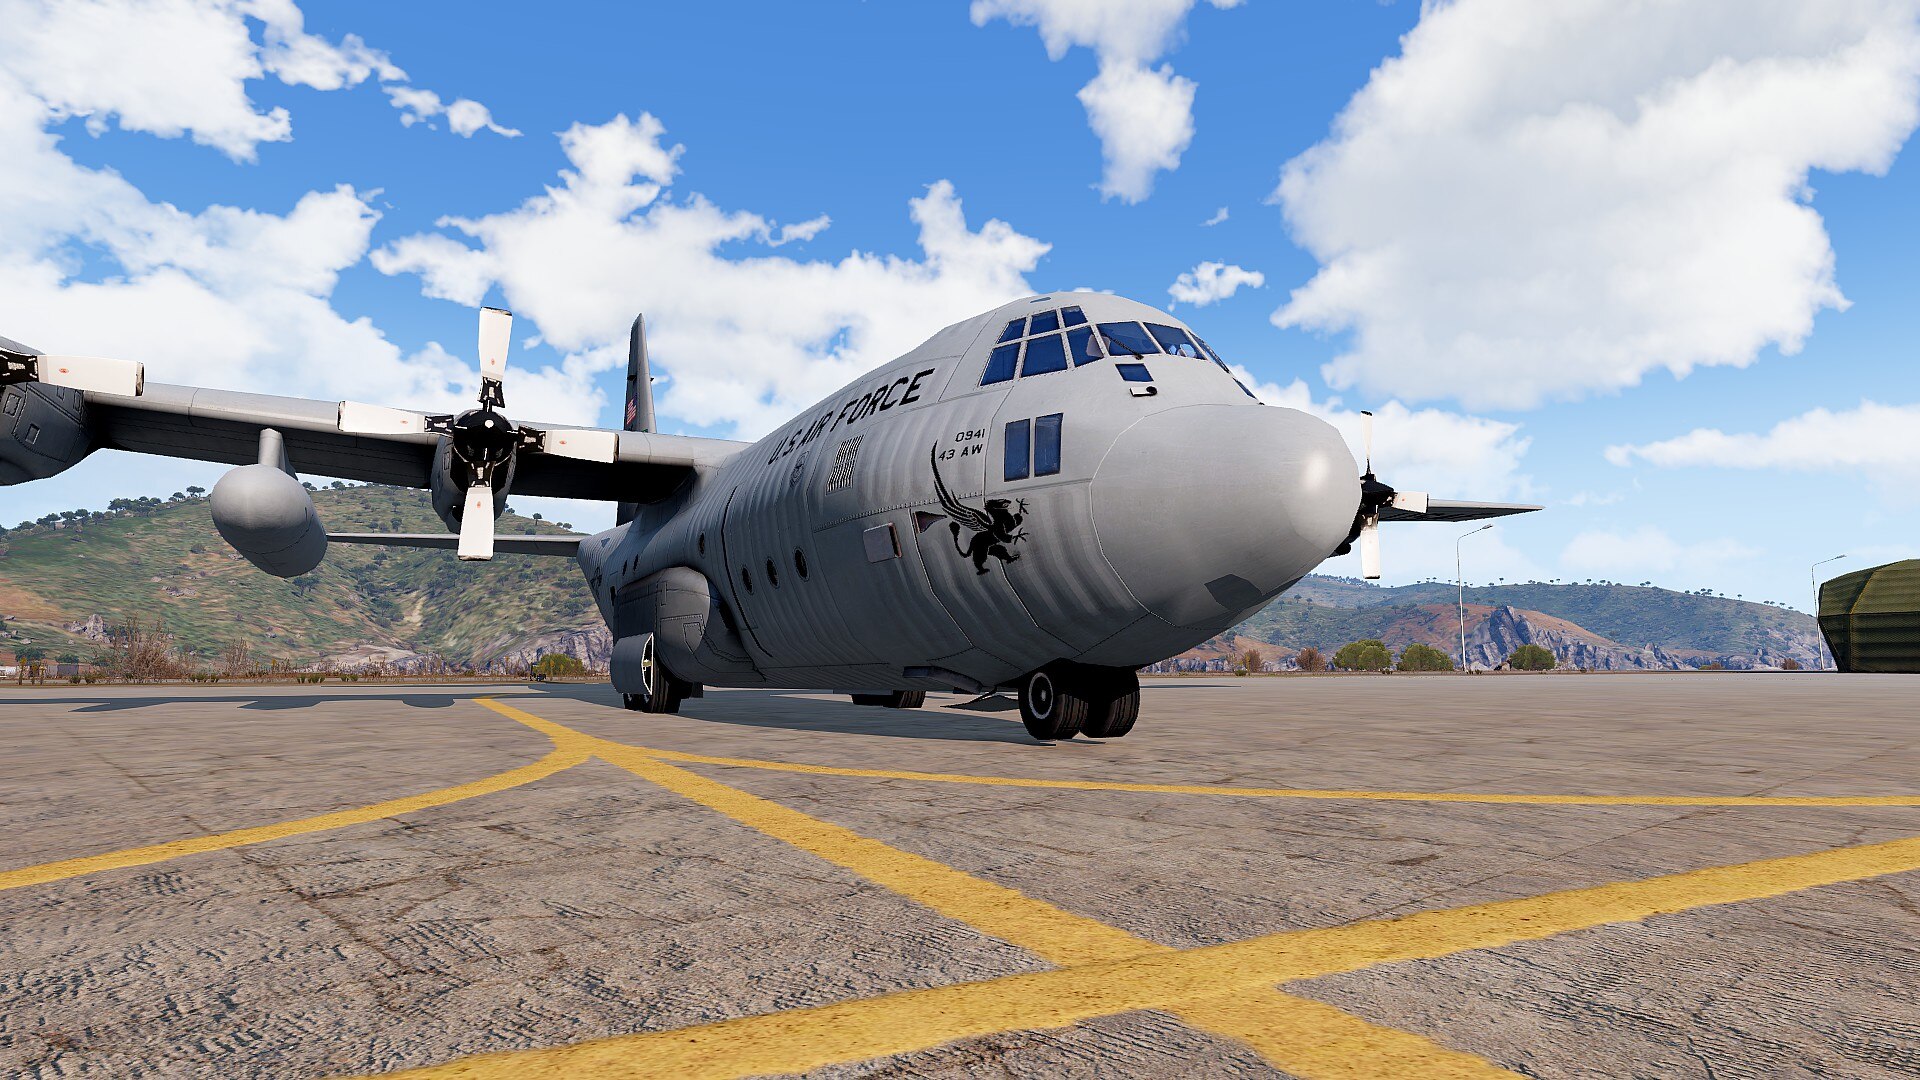 Arma Platform on X: #Arma3 #COMRAD #38!📡 Another month has